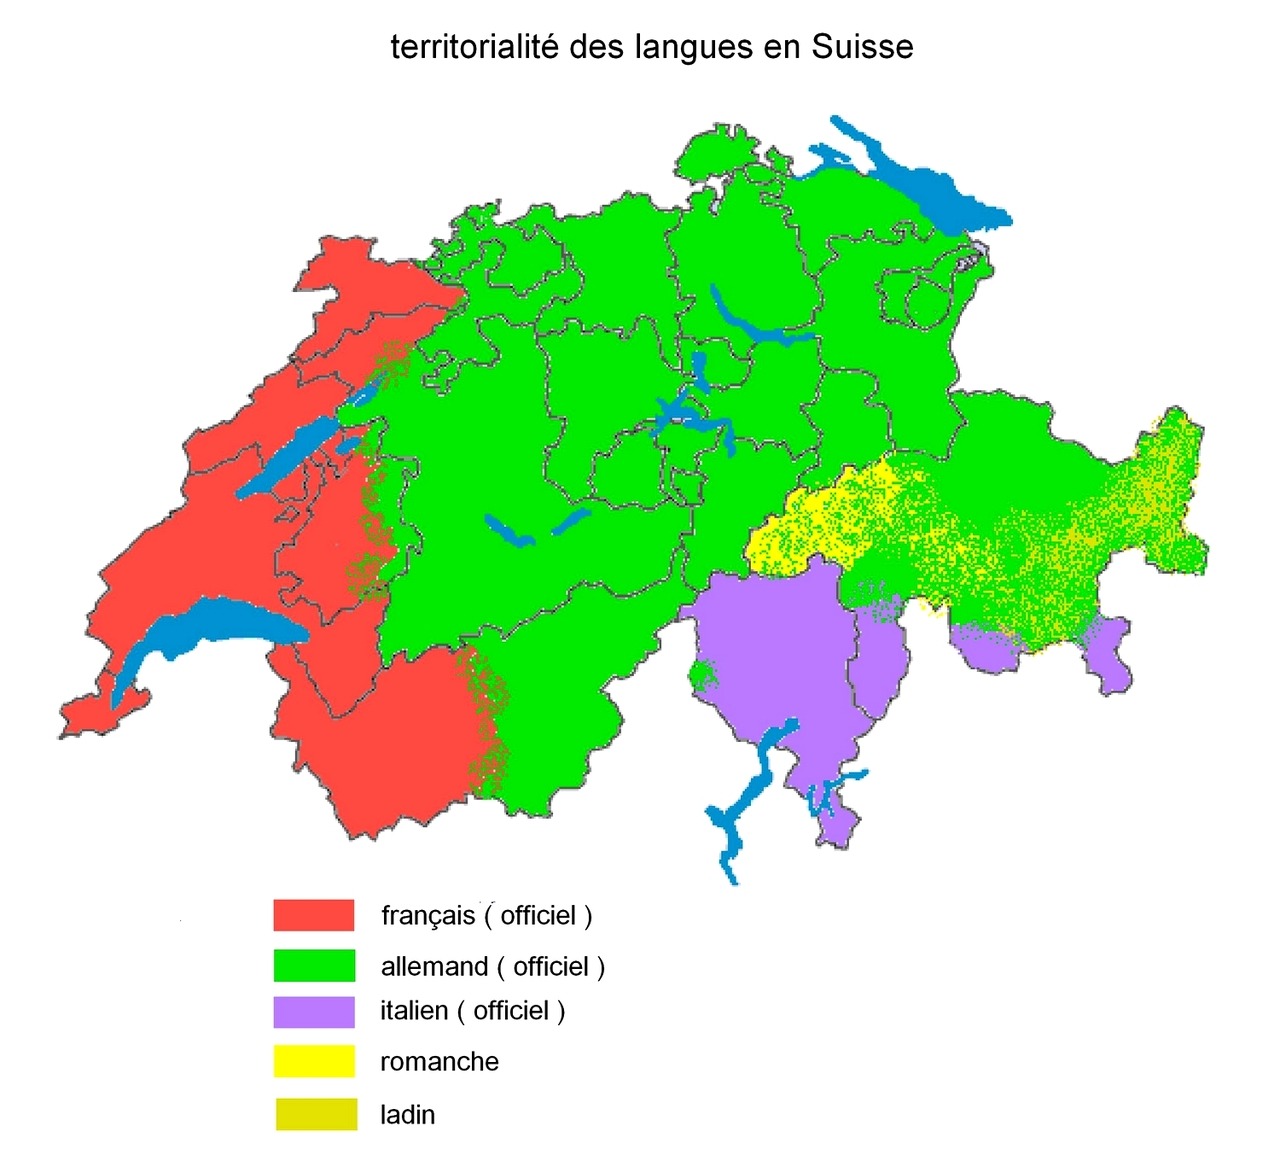 territoriality-of-languages-in-switzerland-maps-on-the-web